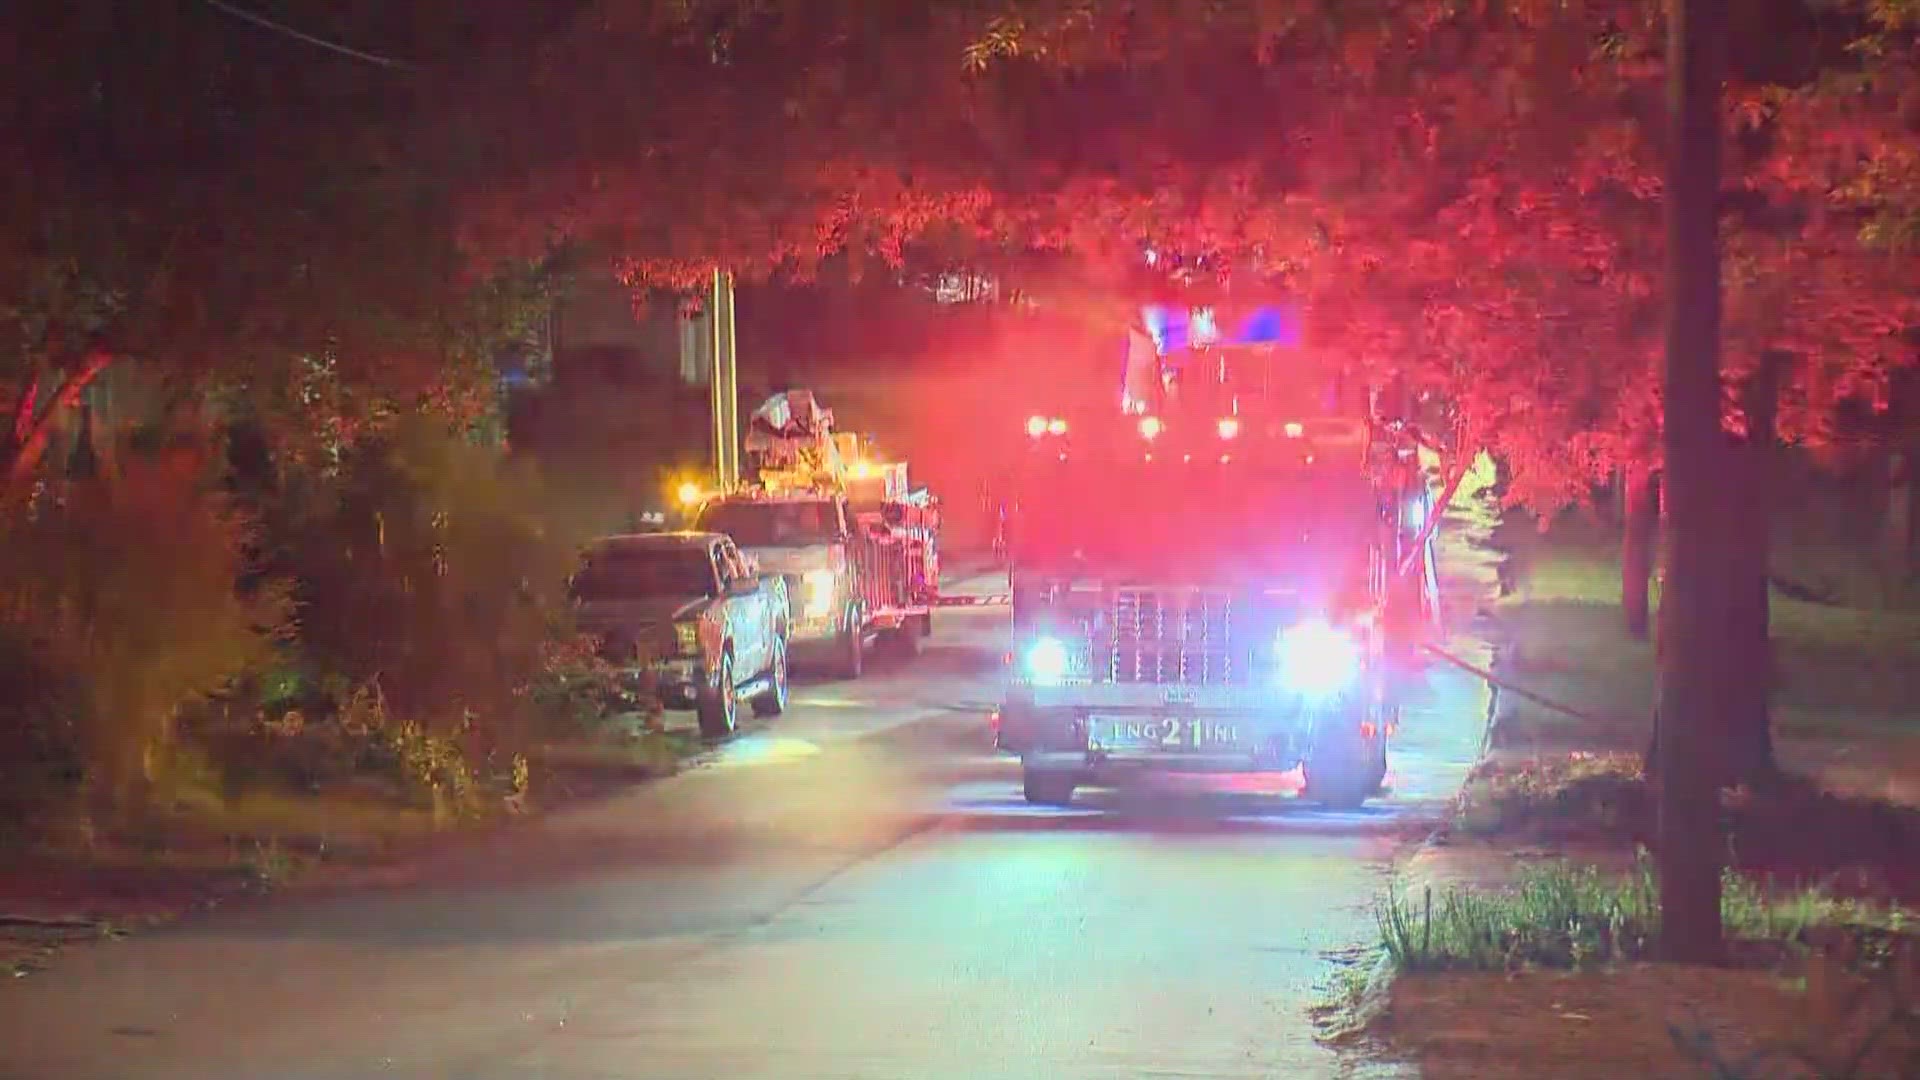 Crews are investigating what caused a house fire in northwest Charlotte early Tuesday morning.